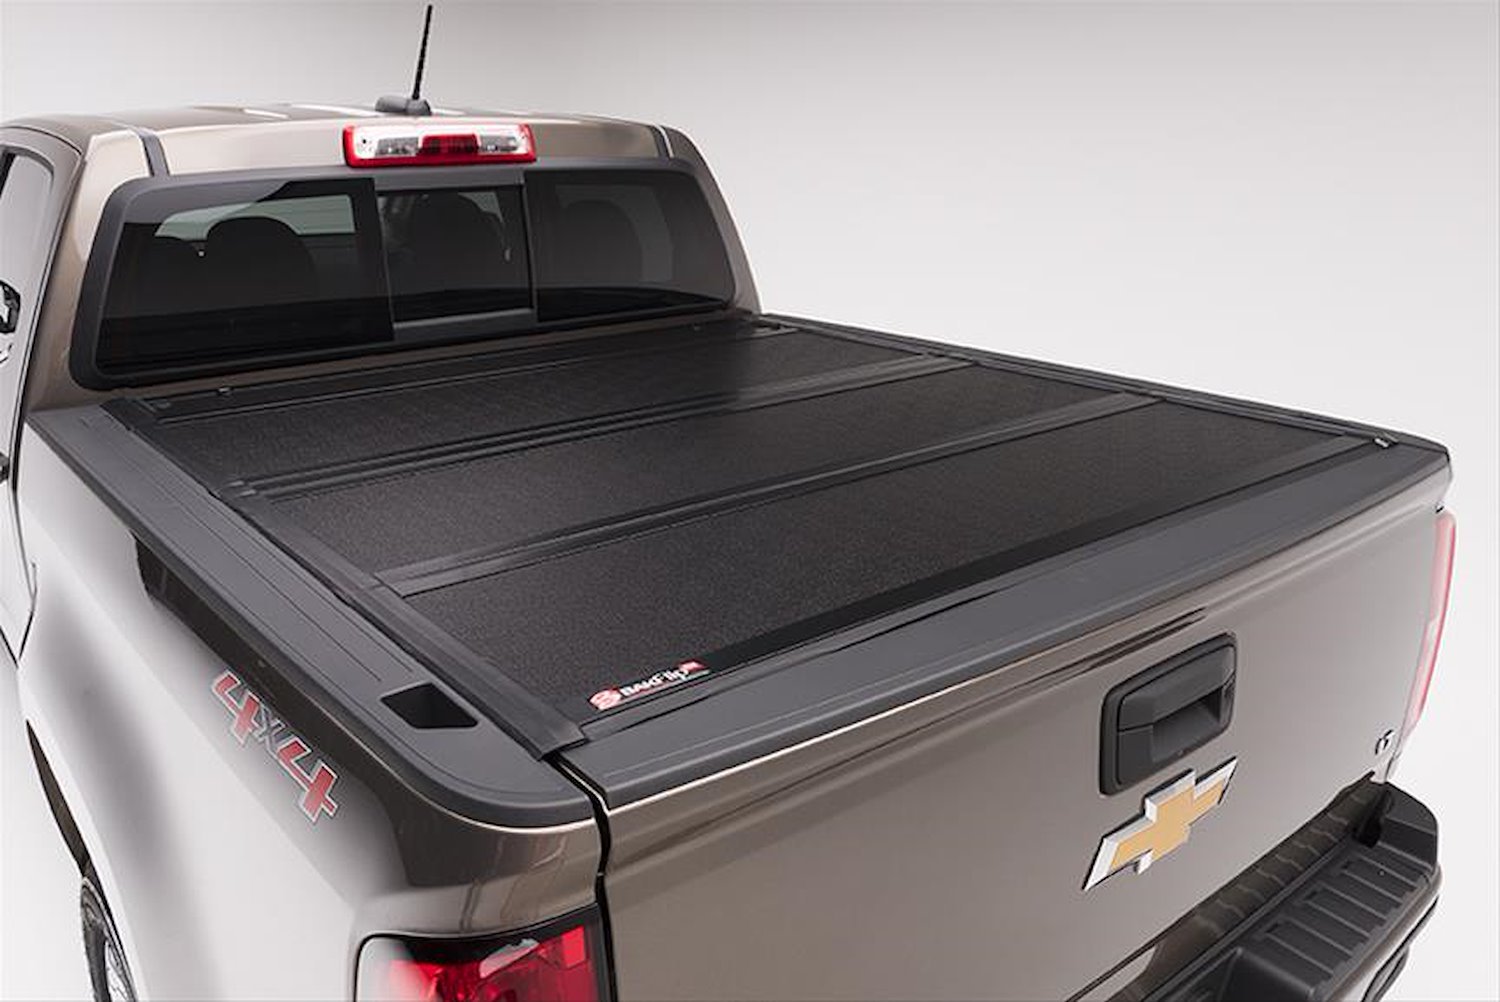 226121 BAKFlip G2 for 15-18 GM Silverado/Sierra/2019 Legacy/Limited 6.7 ft. Bed, Hard Folding Cover Style [Black Finish]